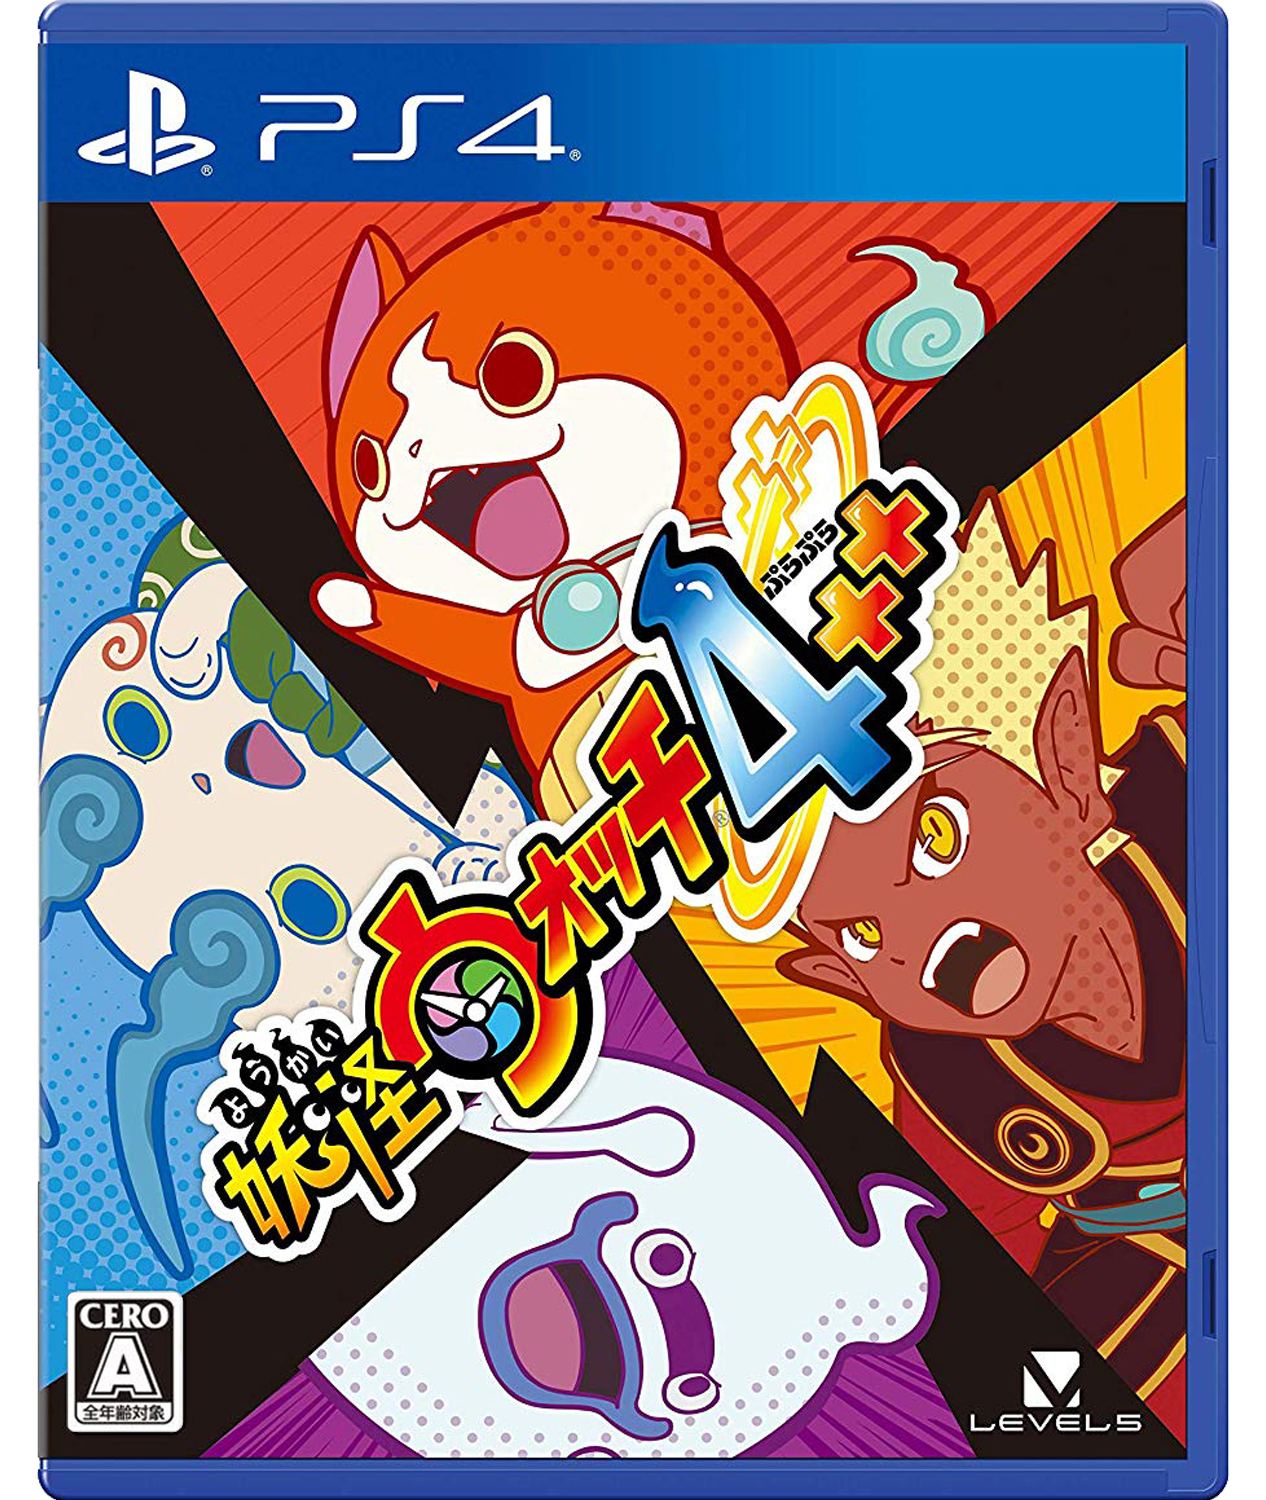 Yo-kai Watch 4++ for PlayStation 4 - Bitcoin & Lightning accepted